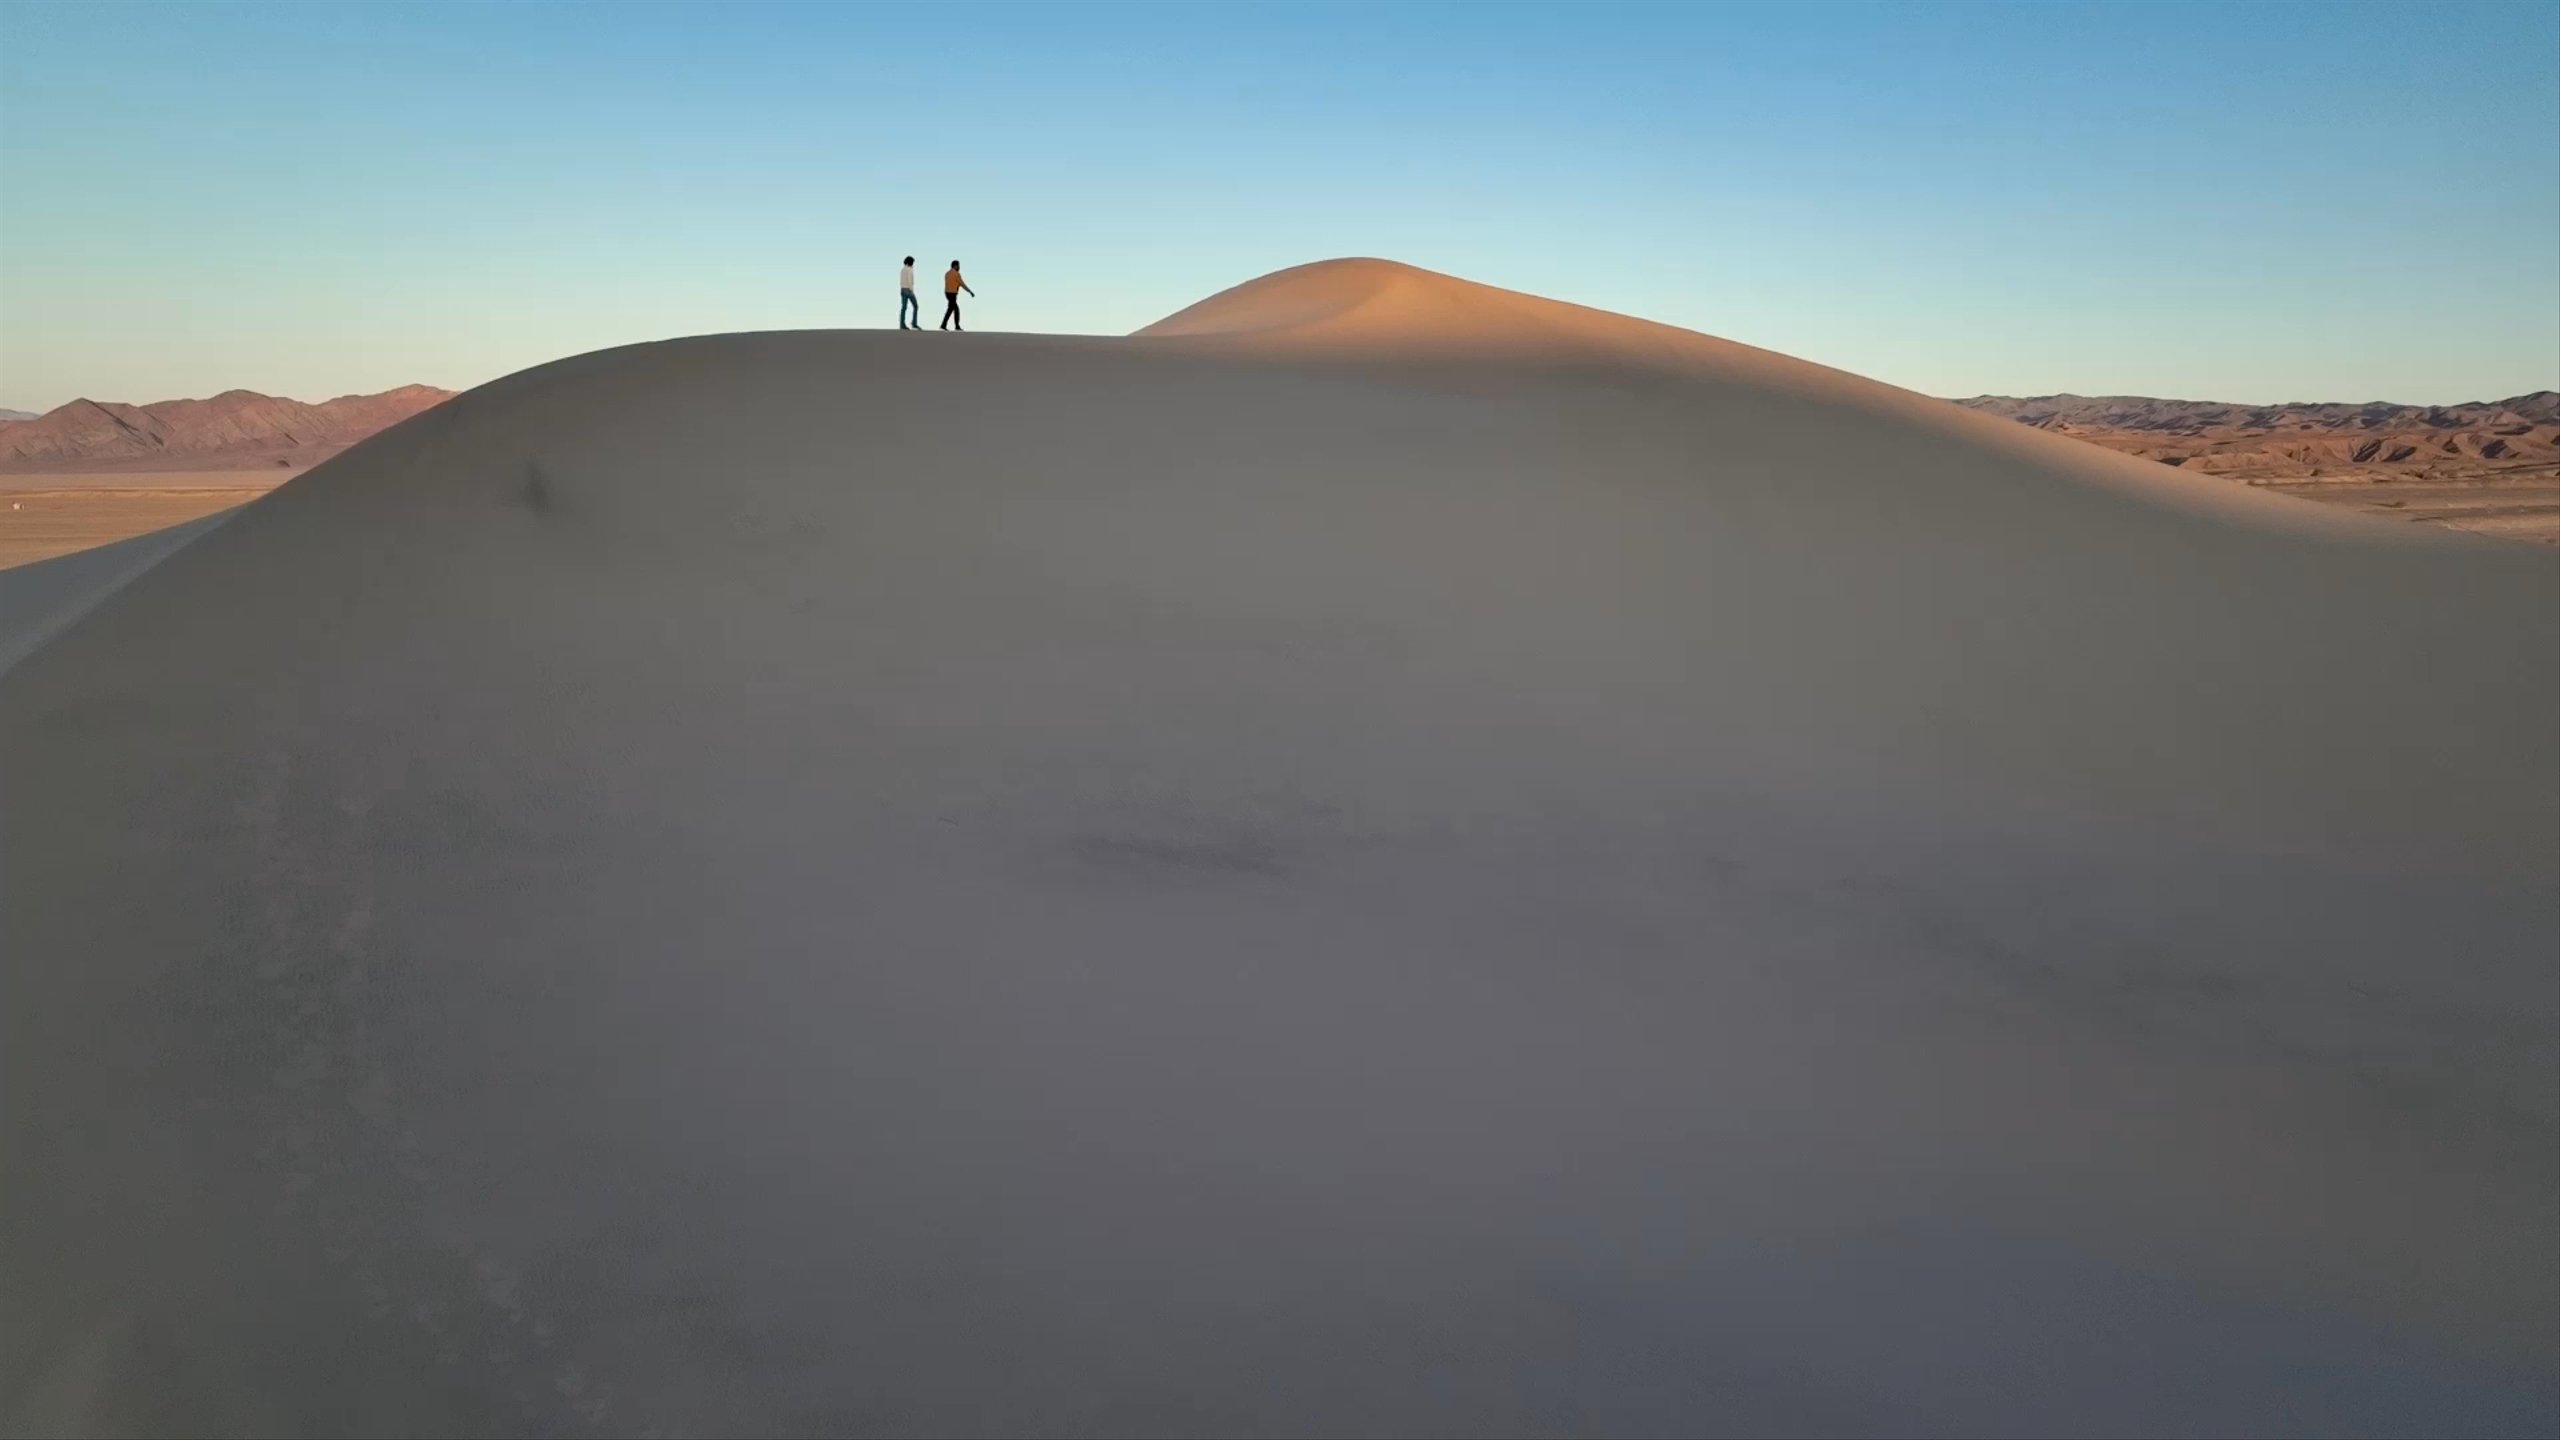 Video of man and woman walking on sand dunes